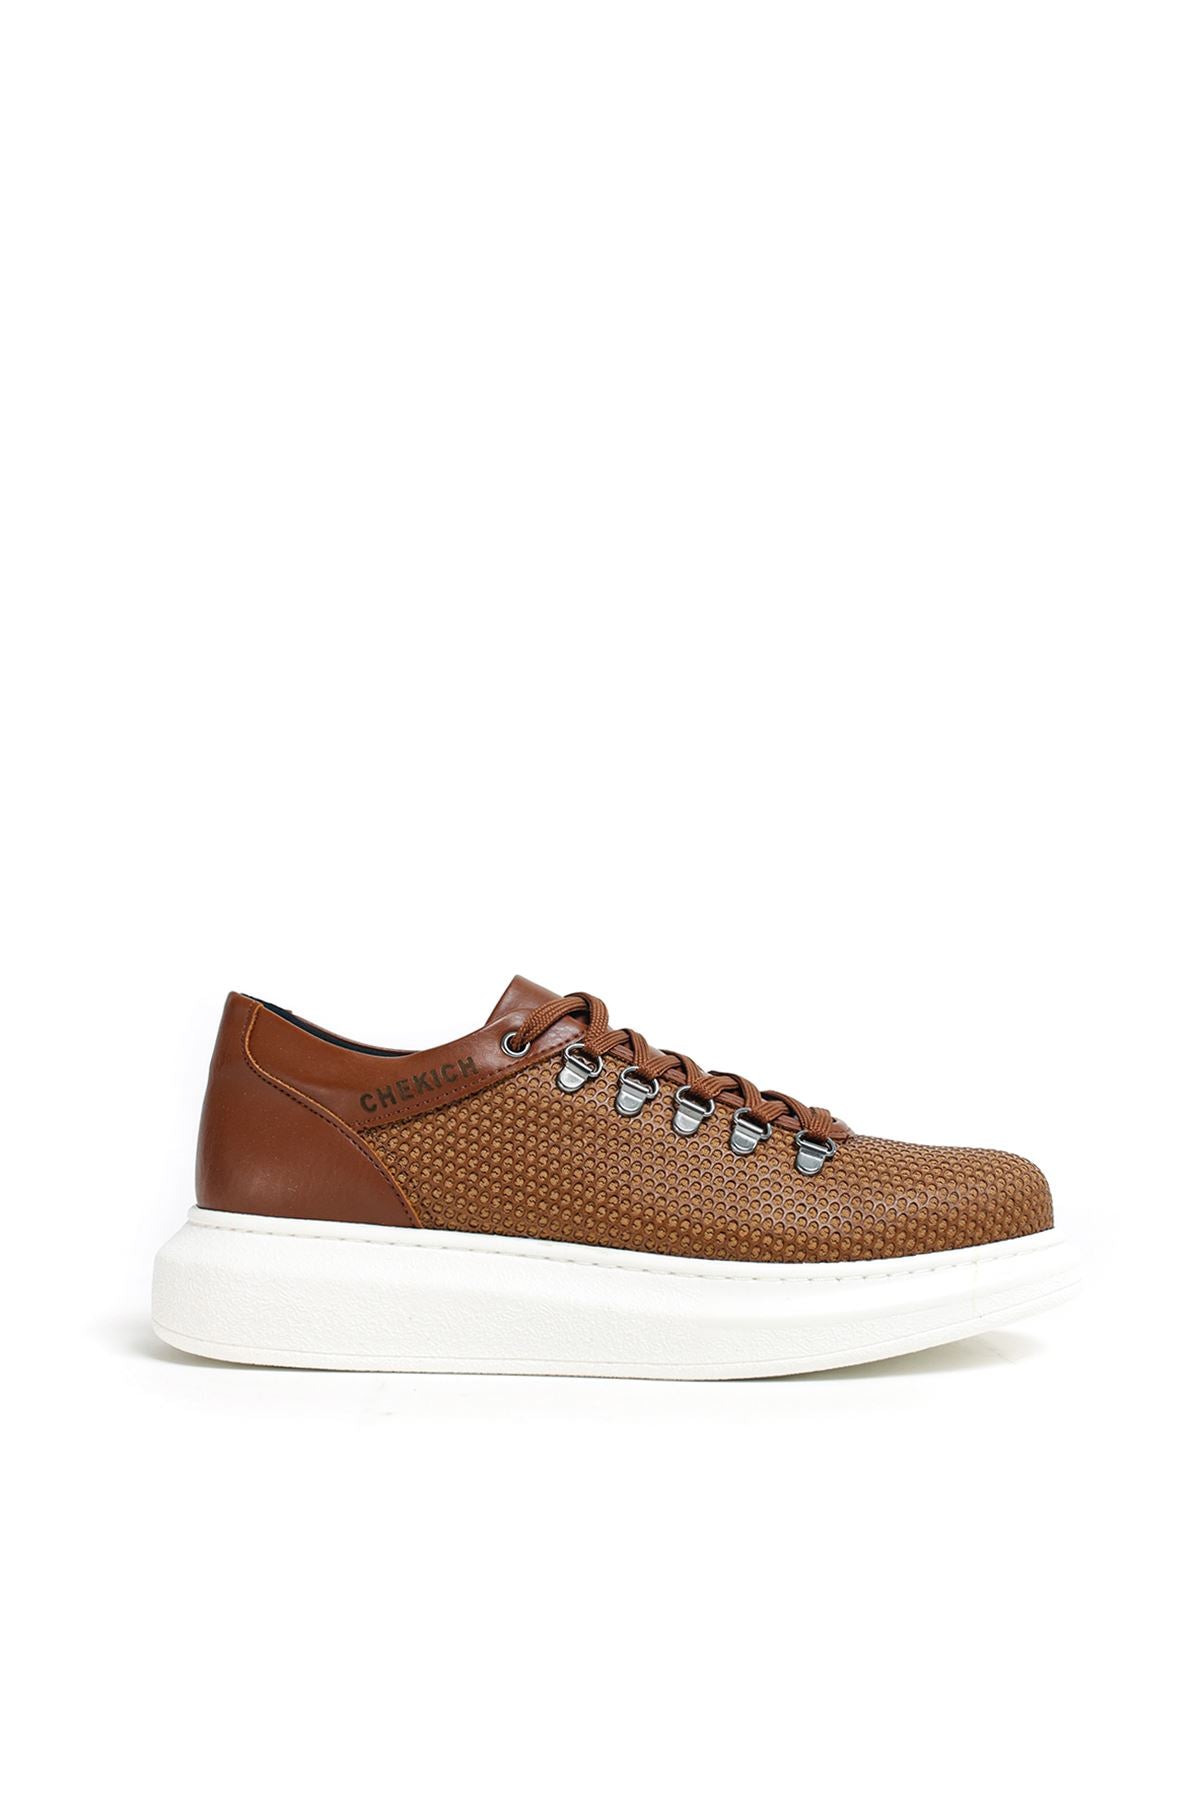 CH021 Men's Unisex Brown-White Sole Honeycomb Processing Casual Sneaker Sports Shoes - STREETMODE ™